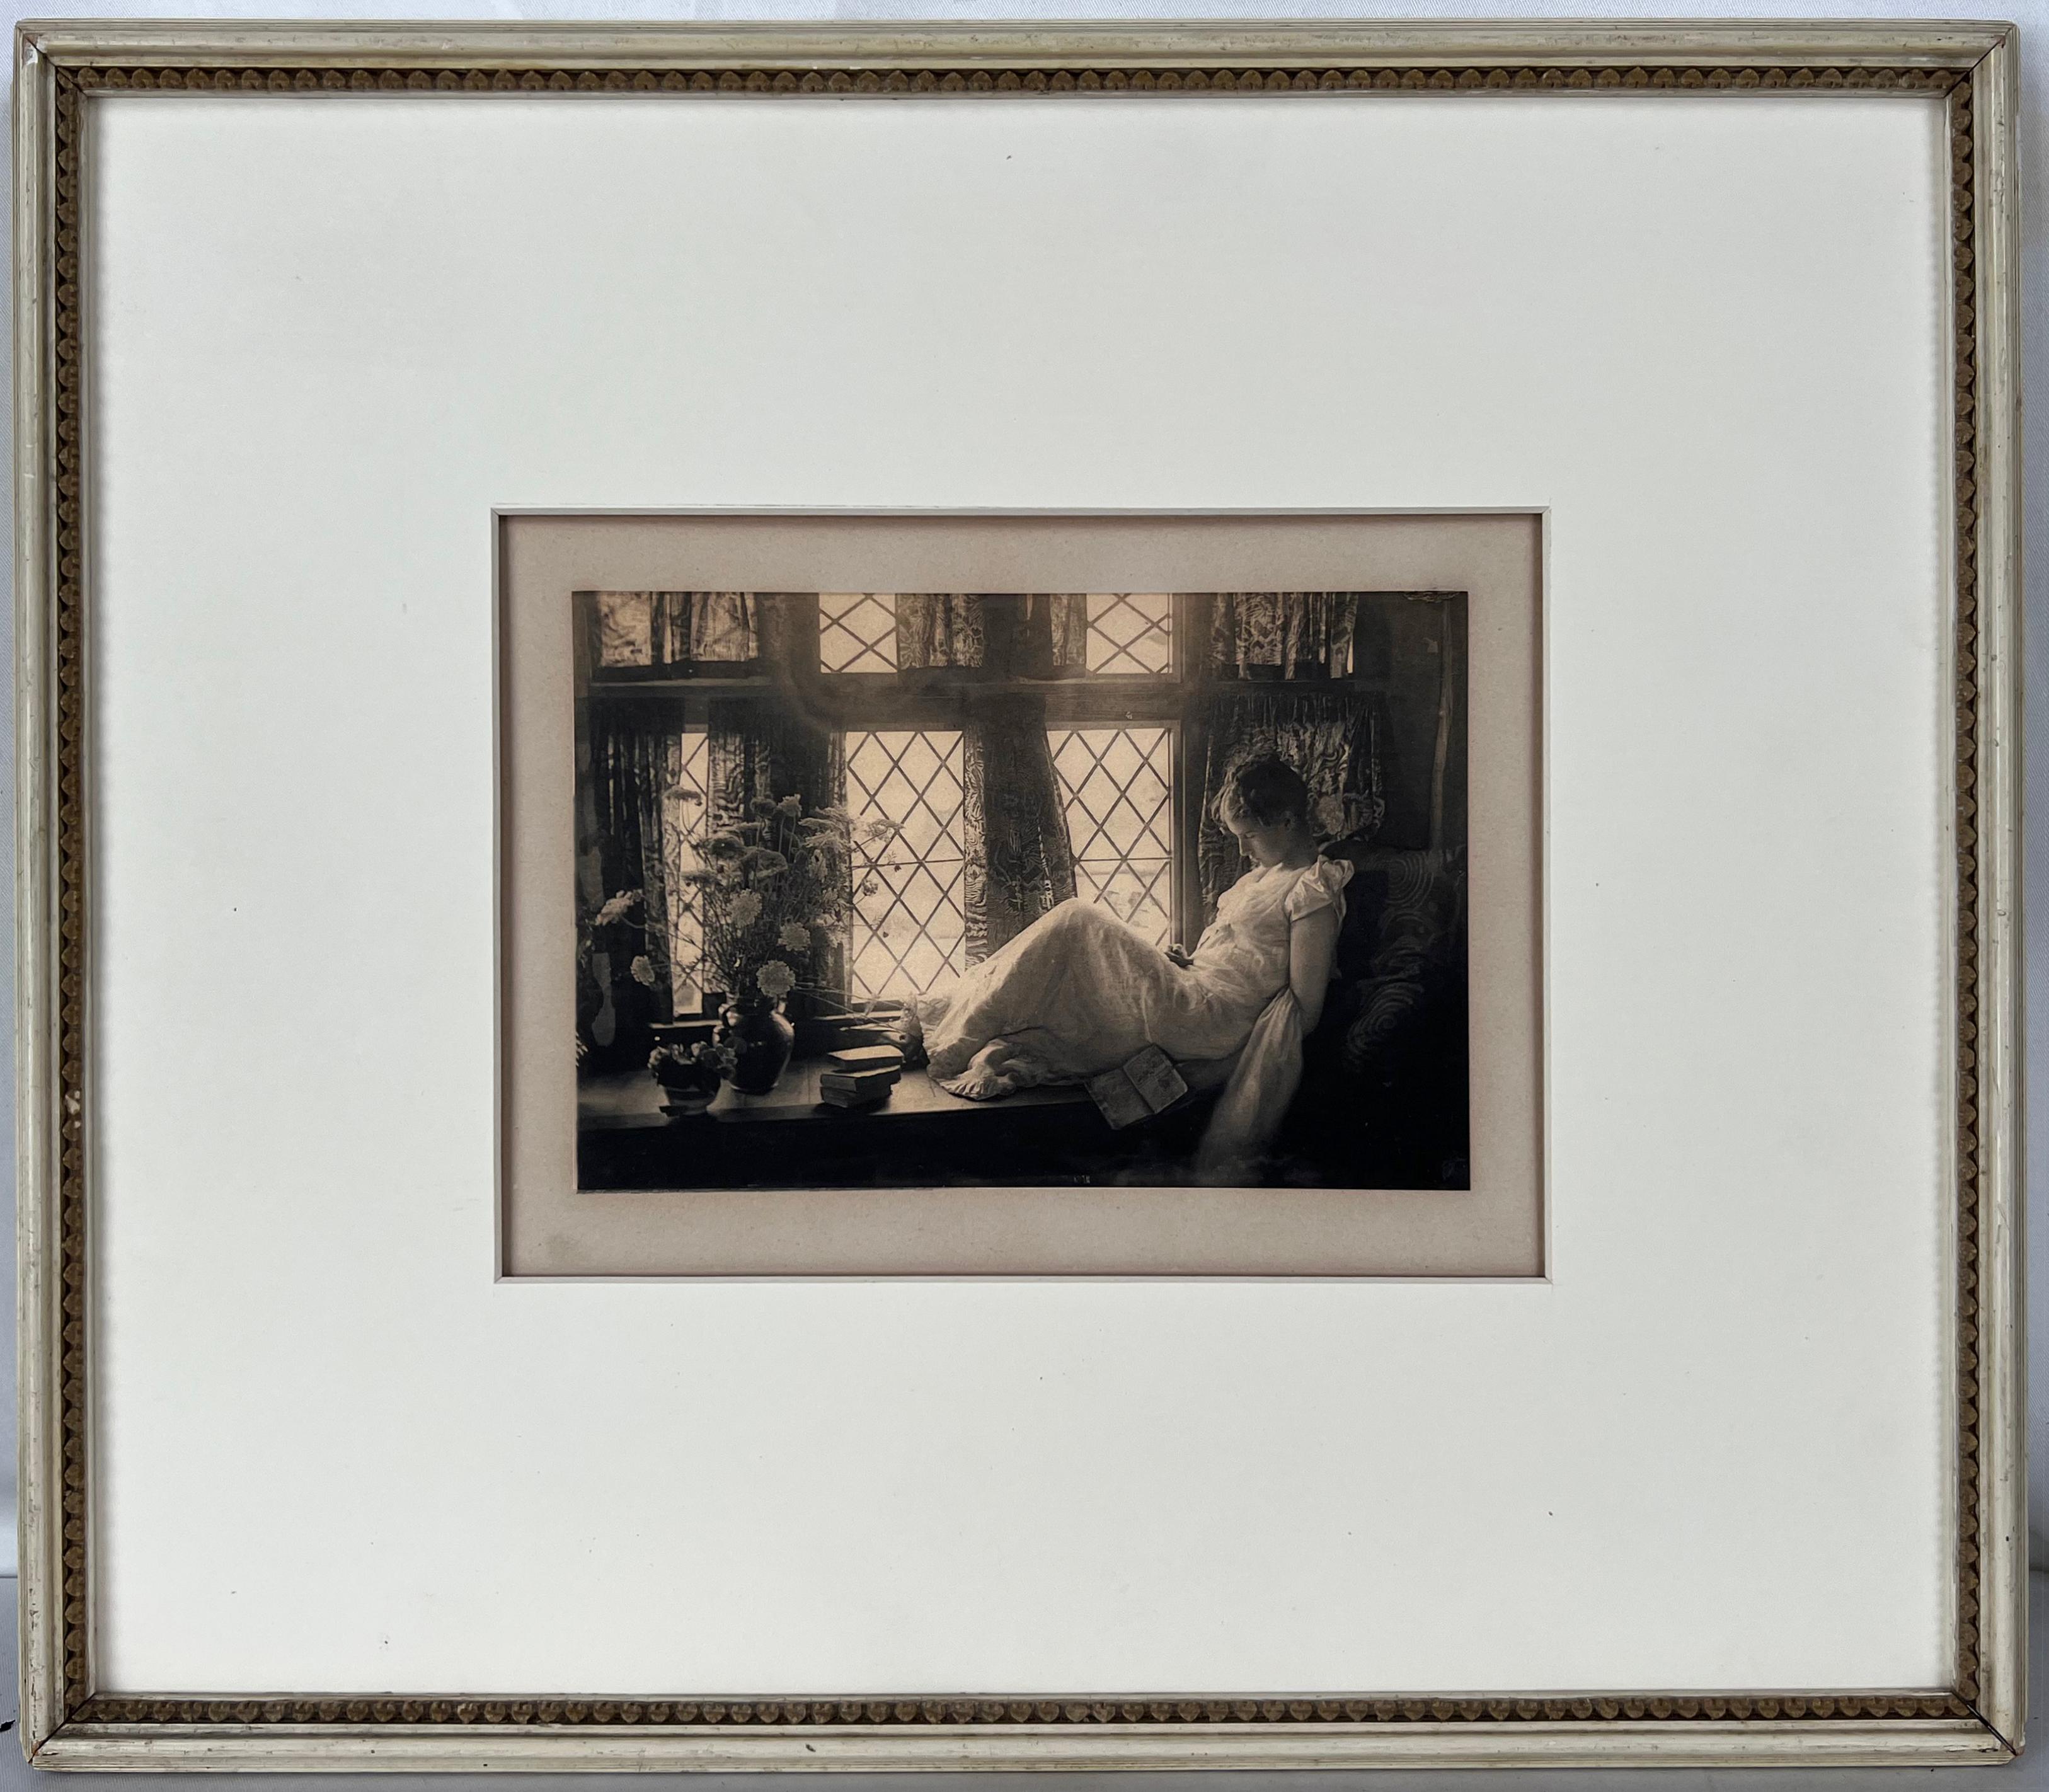 Emma Justin Farnsworth Figurative Print - Young Girl Asleep in the Window - Poetry Reading 1904 - Photogravure